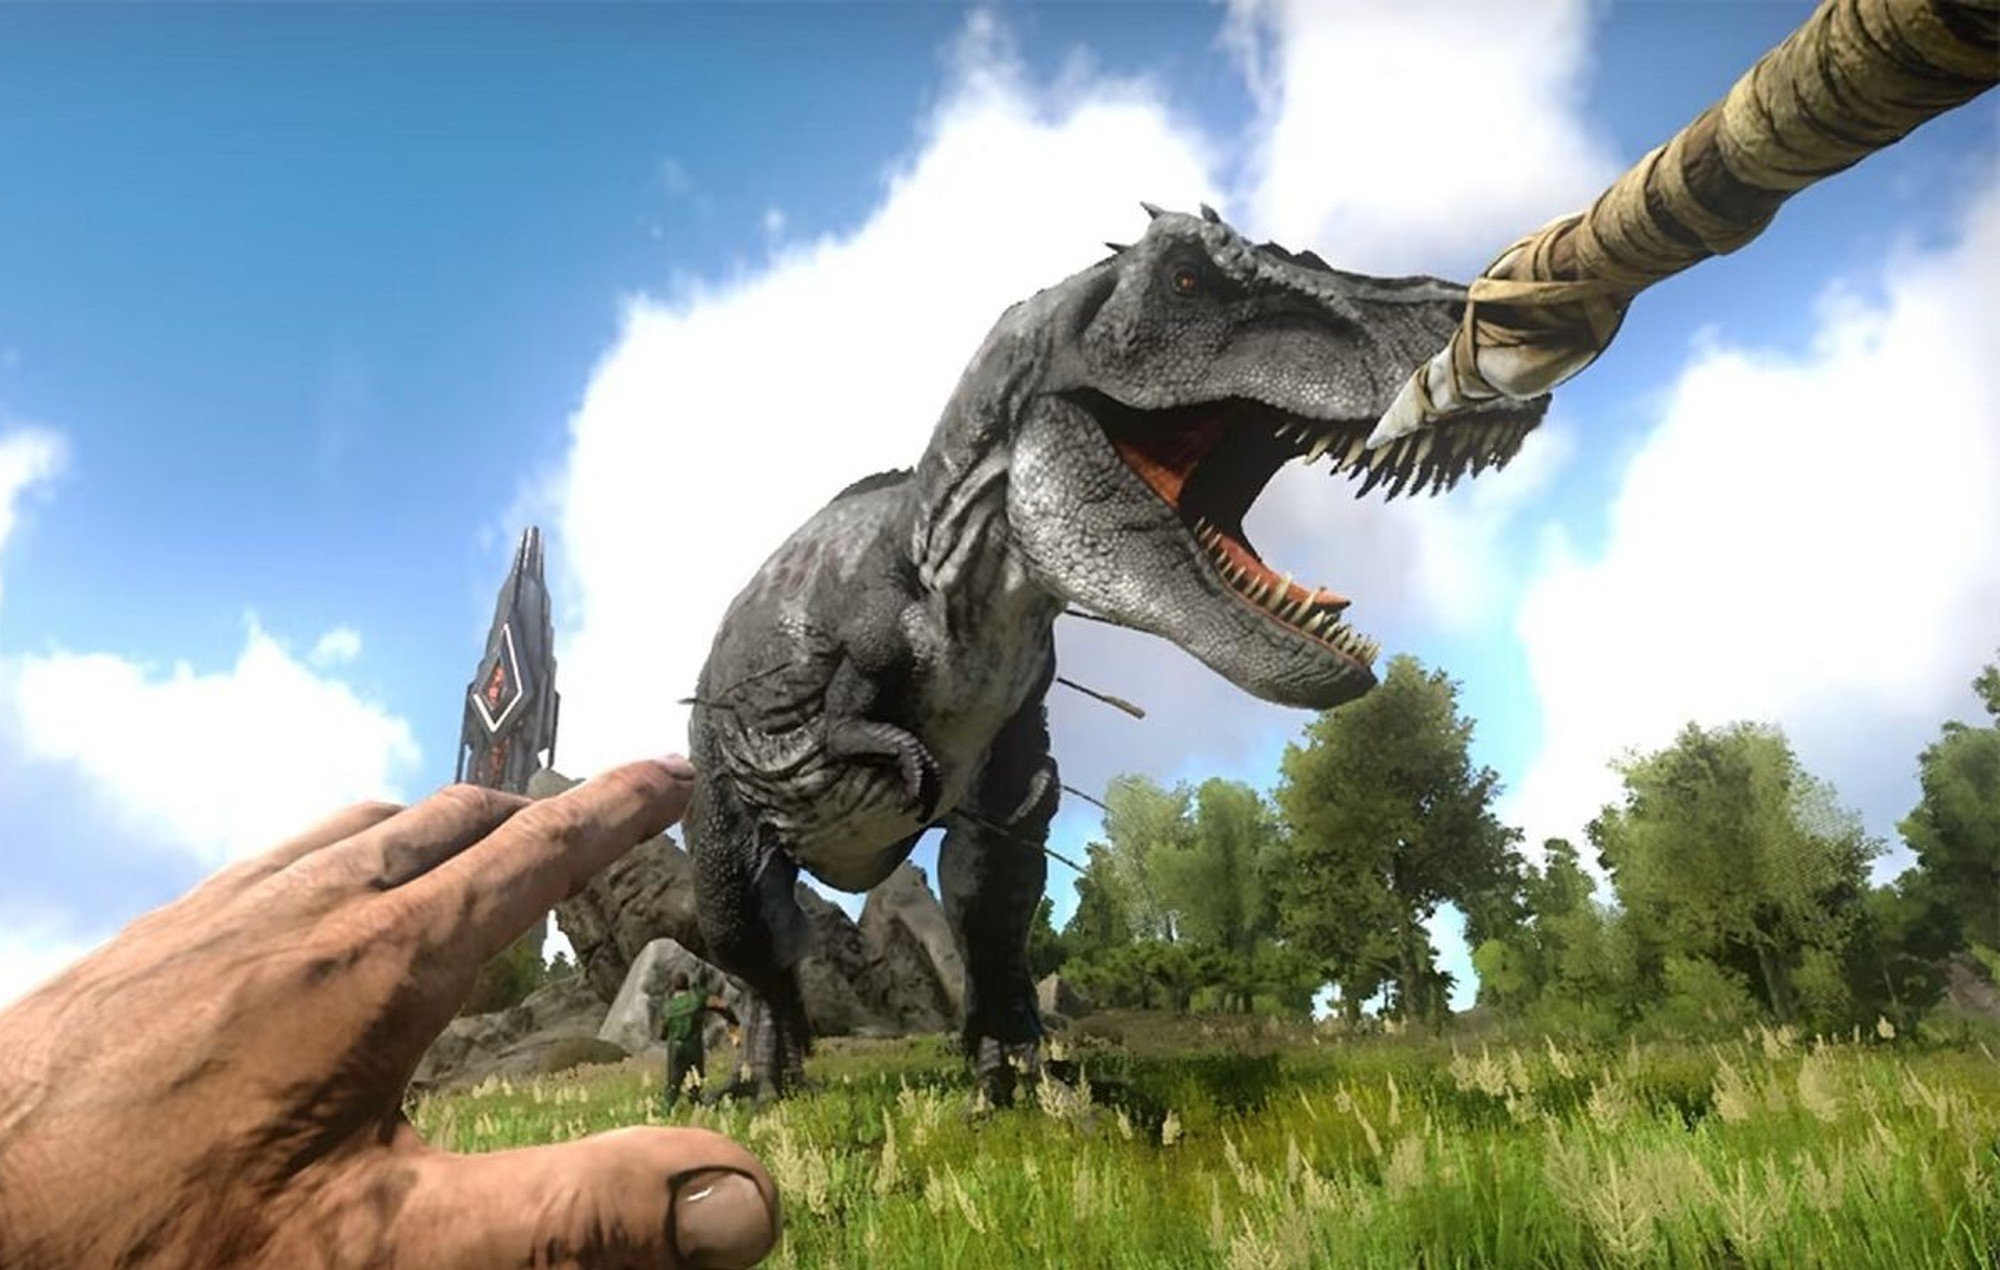 ARK: Survival Ascended Developer Studio Wildcard Temporarily Disables  Windows 10 PC Crossplay PvP Due to Rampant Cheating